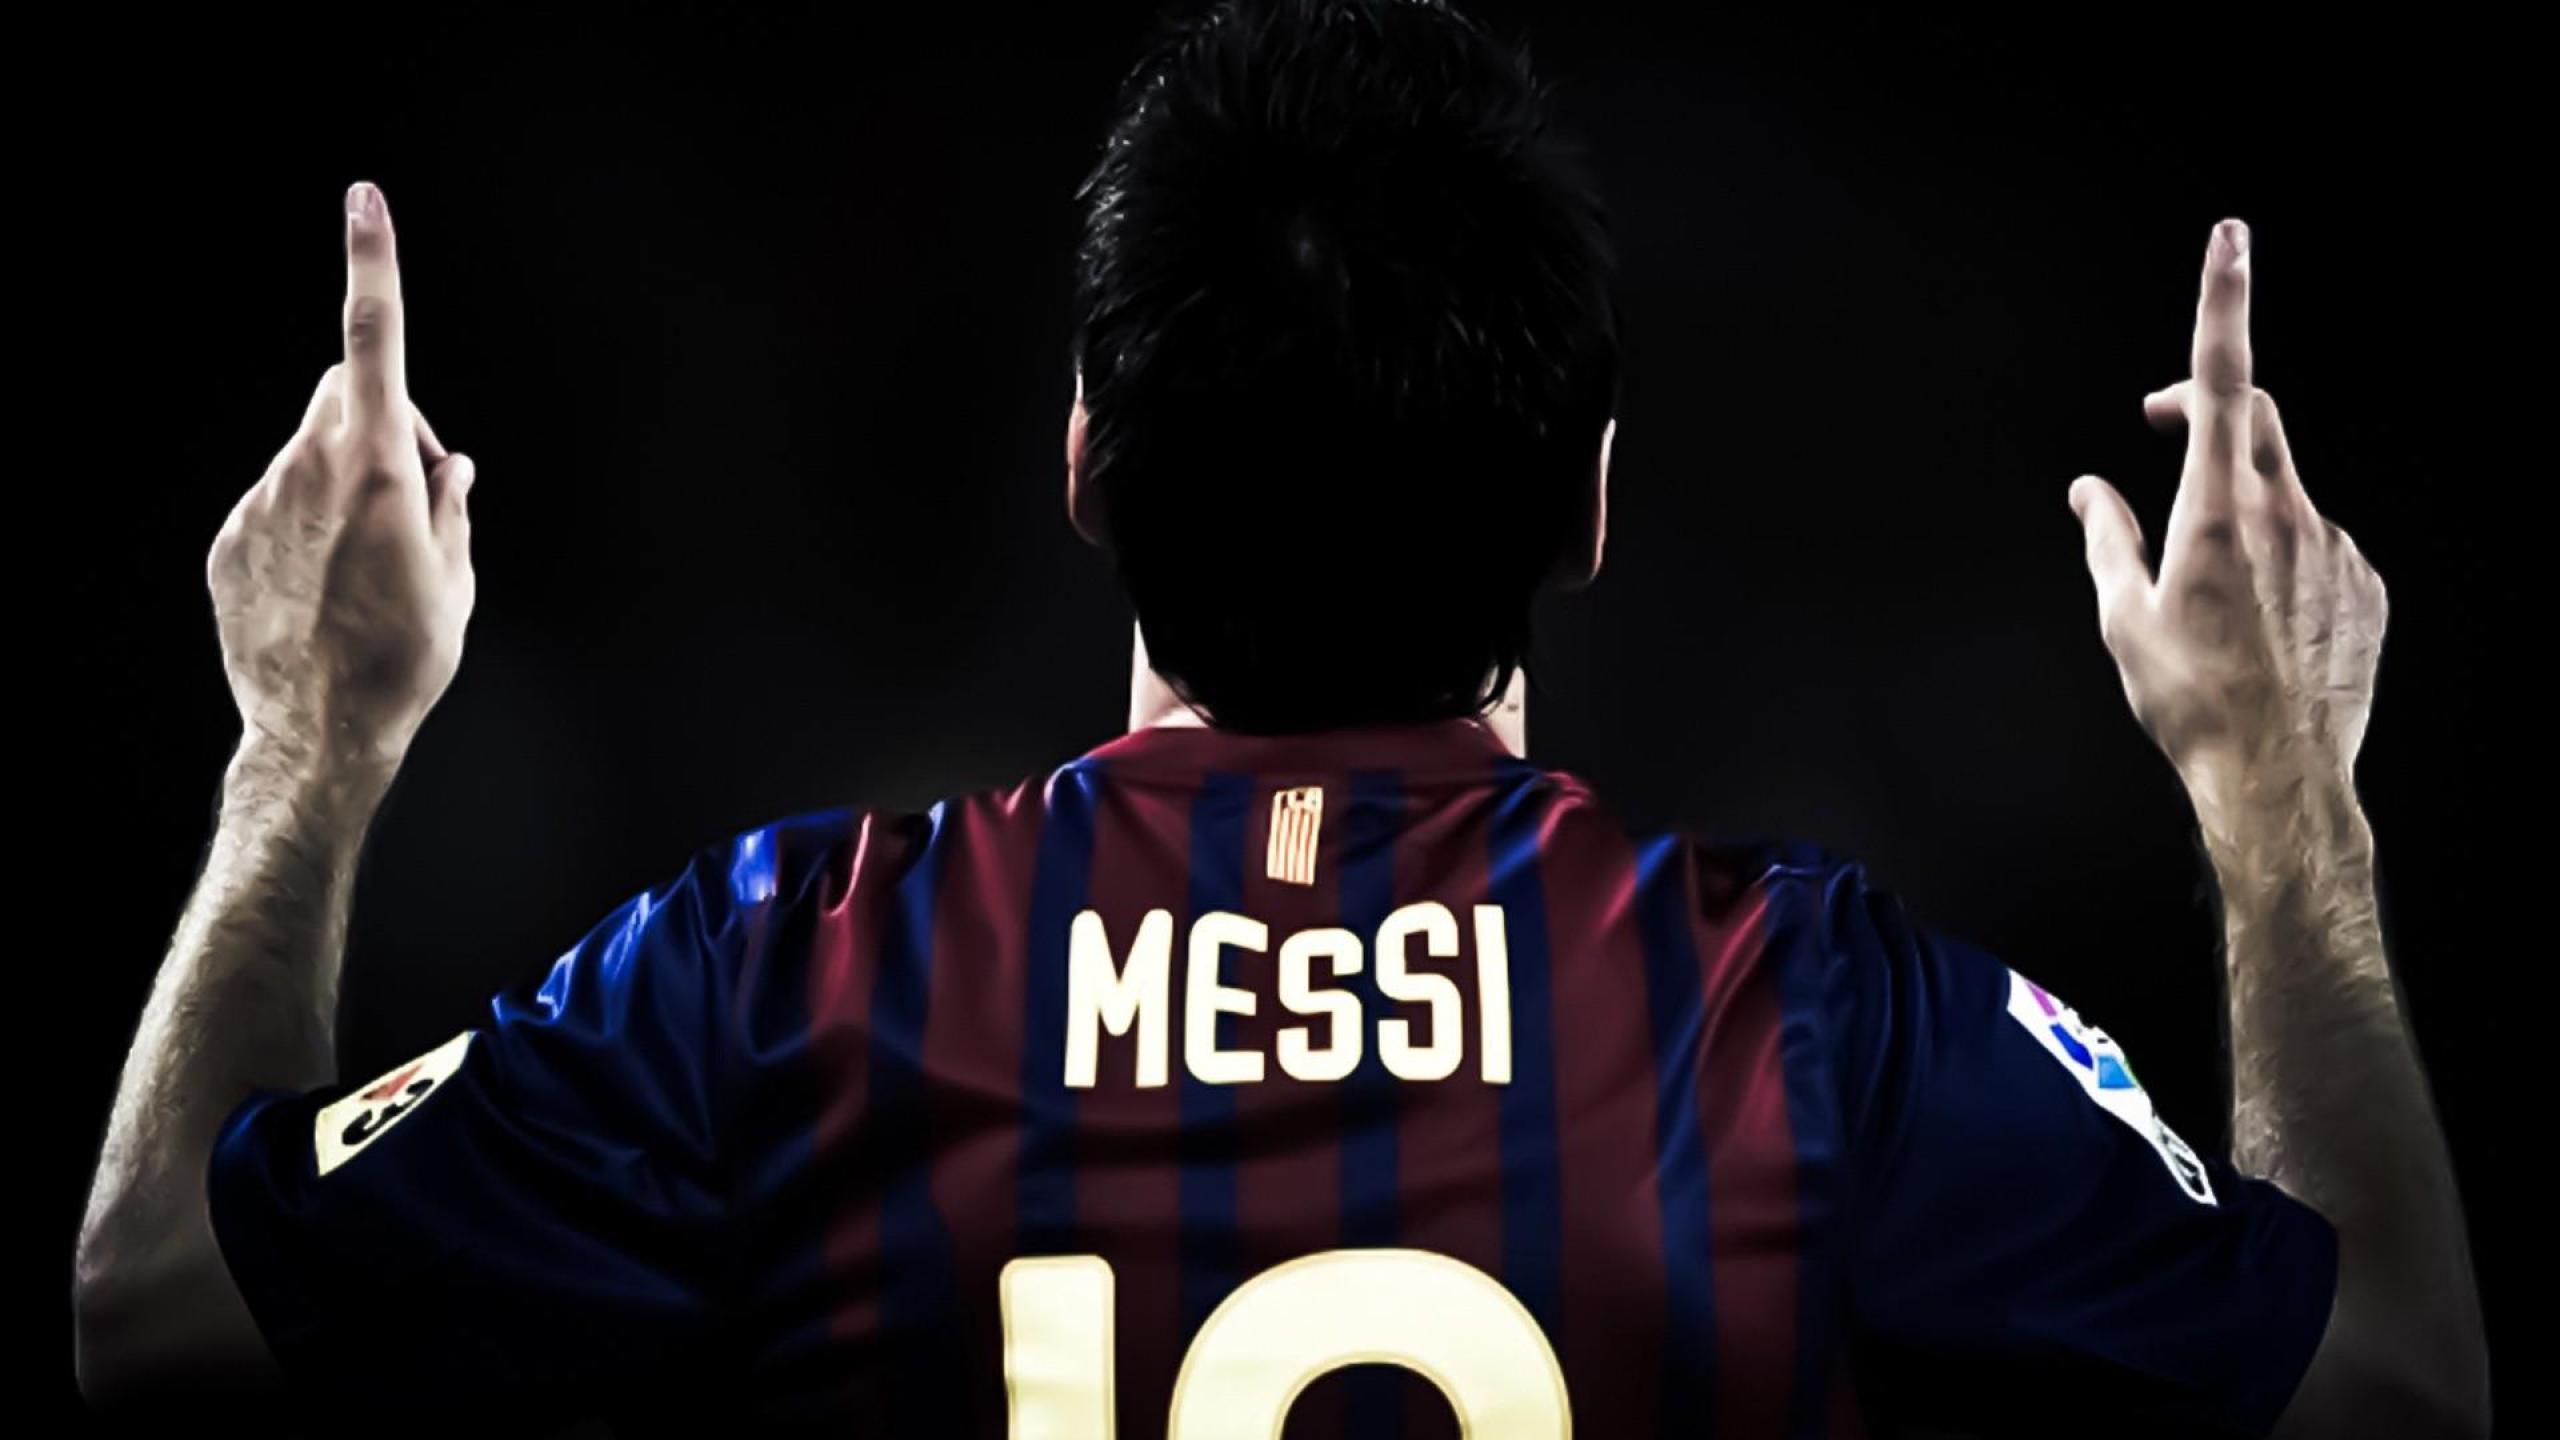 Lionel Messi M10 Wallpapers HD Free Download for Desktop [50 pictures] - Art Wallpaper